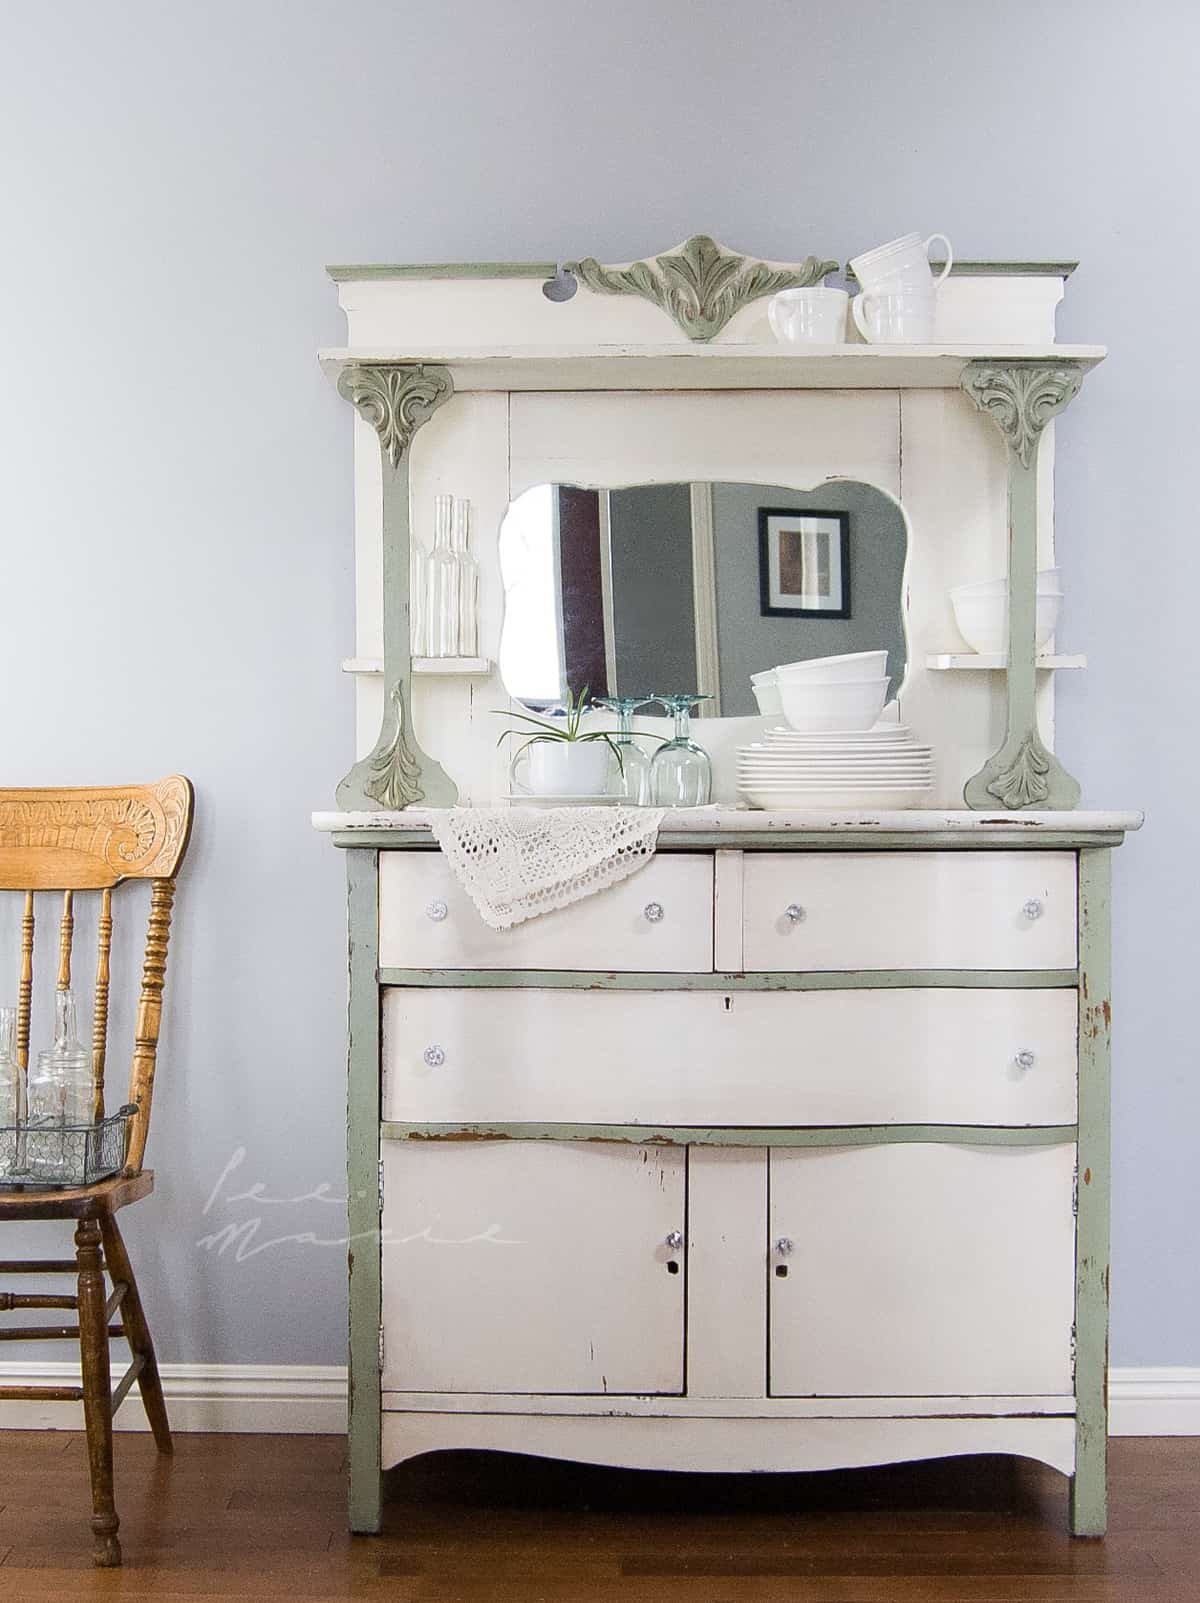 Sage Advice and Sanding Sponges #DIY #furniturepaint #paintedfurniture #chalkpaint #homedecor #sage #offwhite #shabbychic #rustic #storage #countrychicpaint - blog.countrychicpaint.com